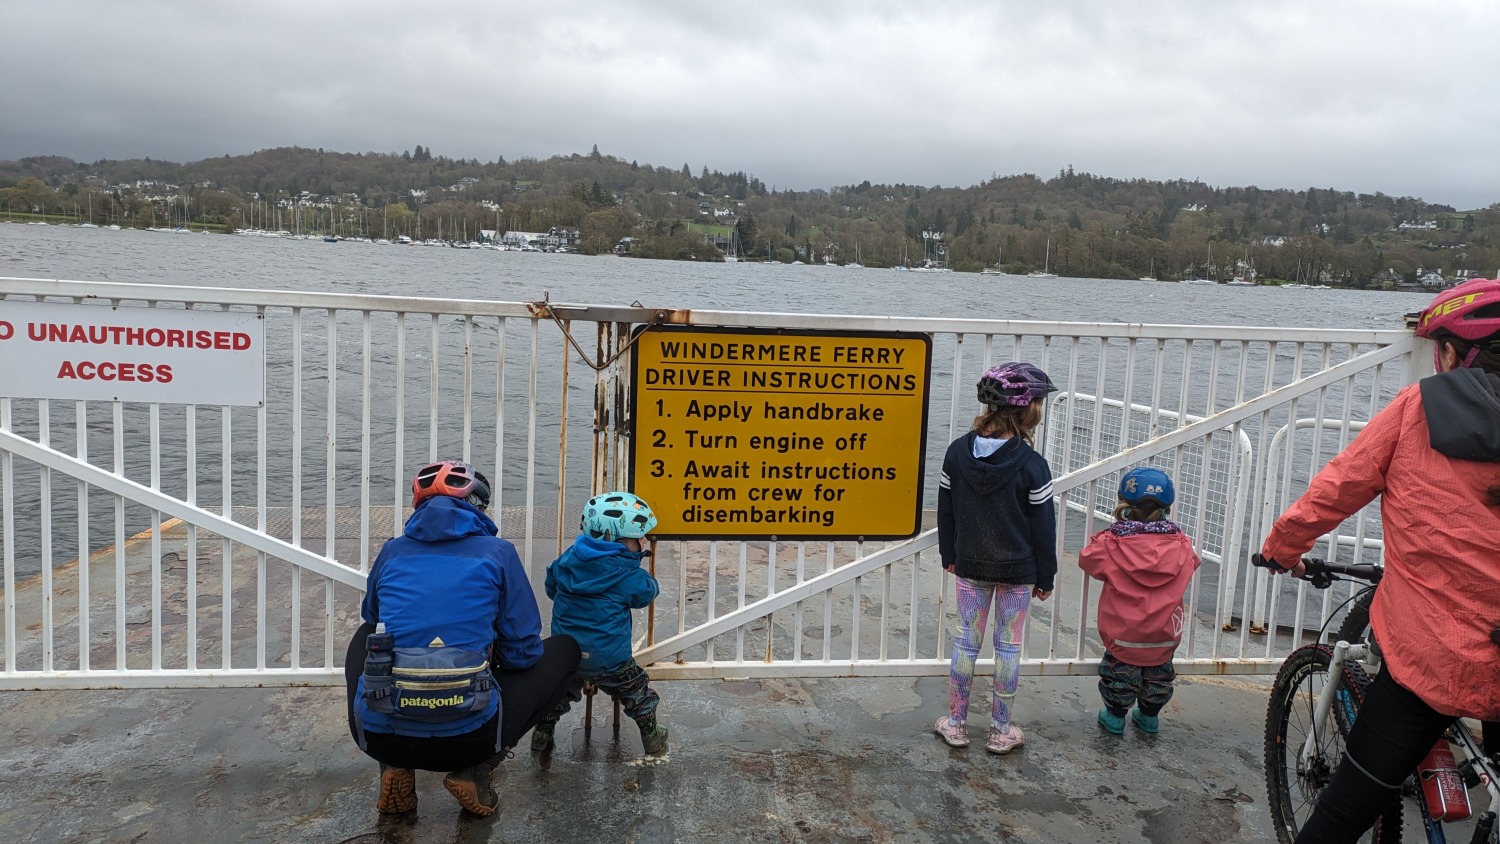 group of children on the Windermere ferry